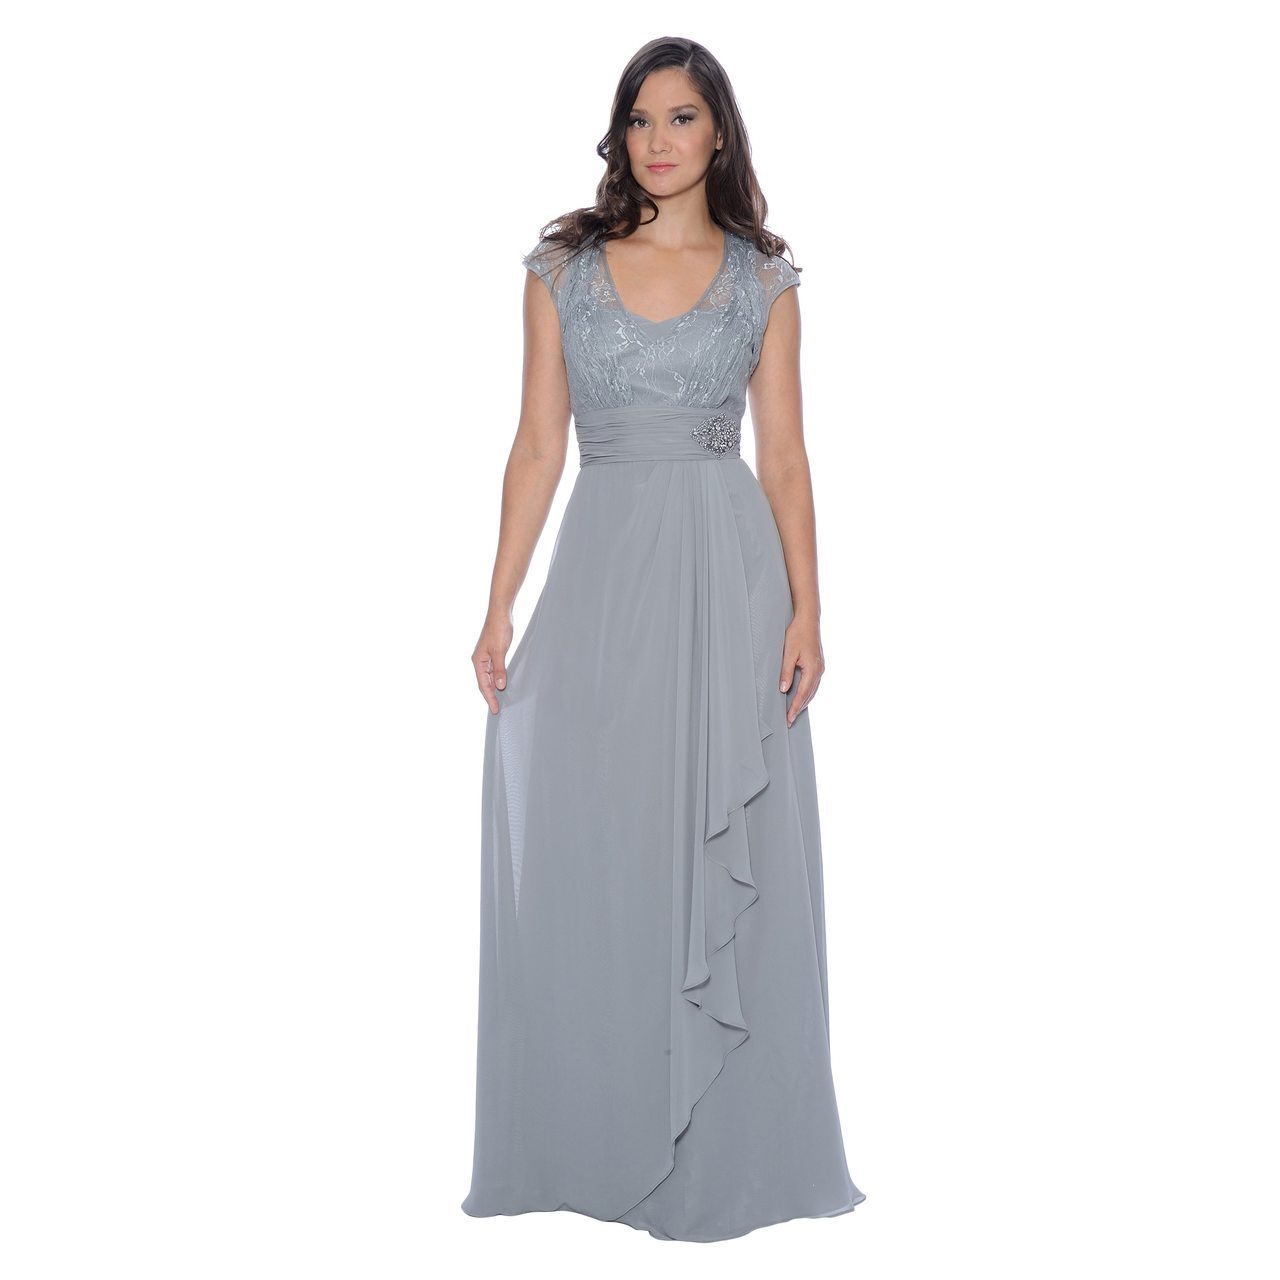 Decode 1.8 - Lace Scoop Top Chiffon Gown 182924
